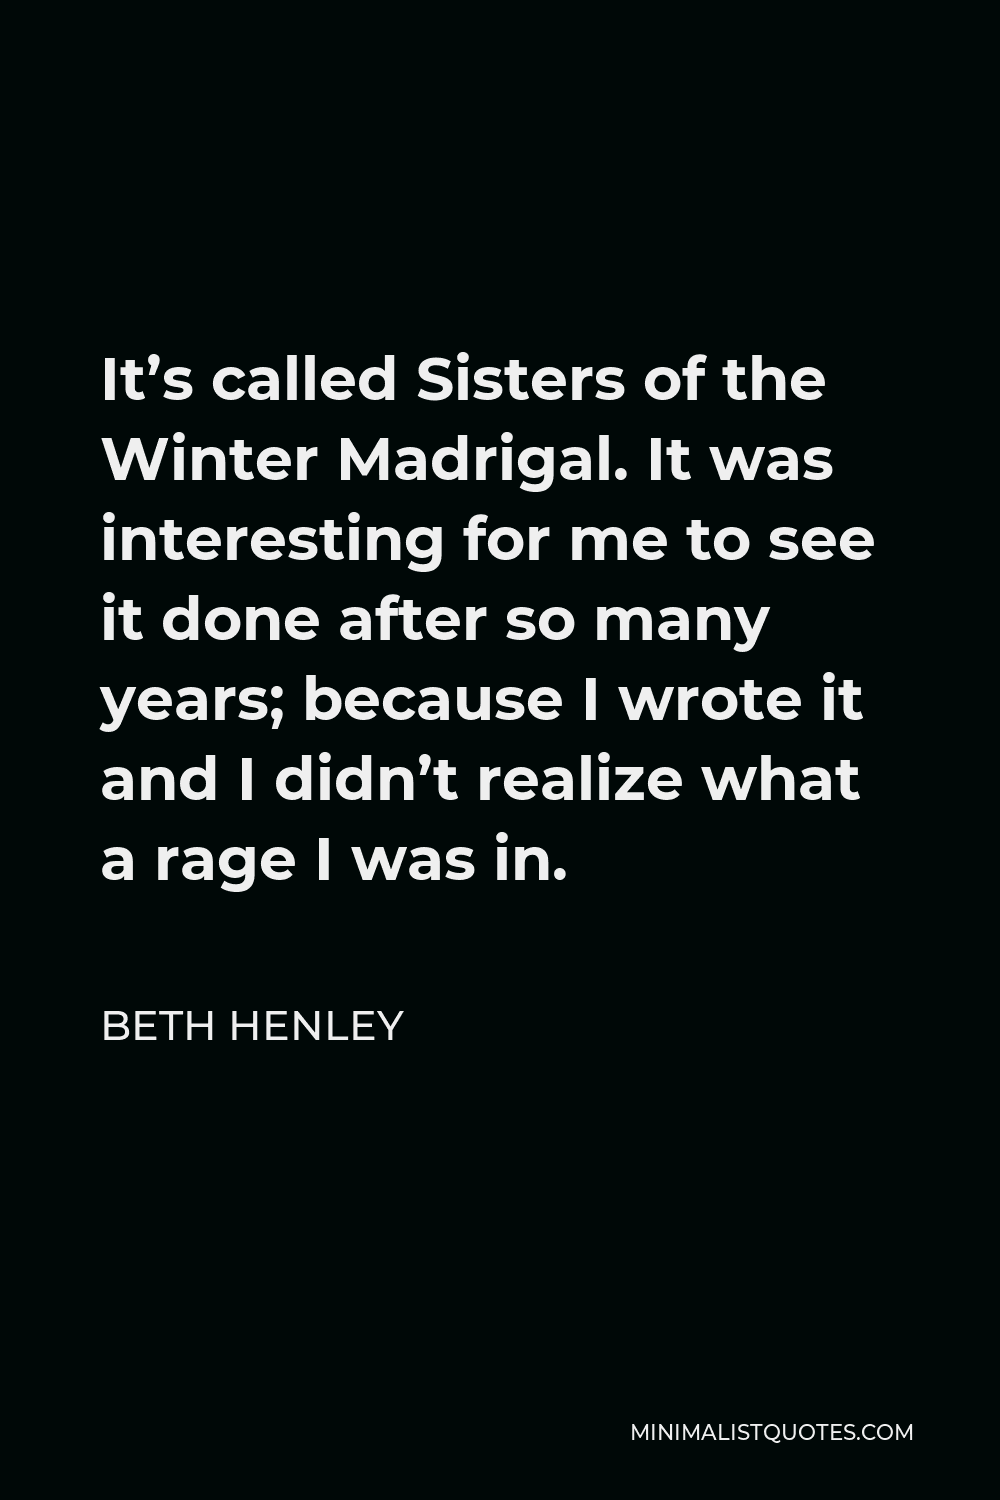 Beth Henley Quote - It’s called Sisters of the Winter Madrigal. It was interesting for me to see it done after so many years; because I wrote it and I didn’t realize what a rage I was in.